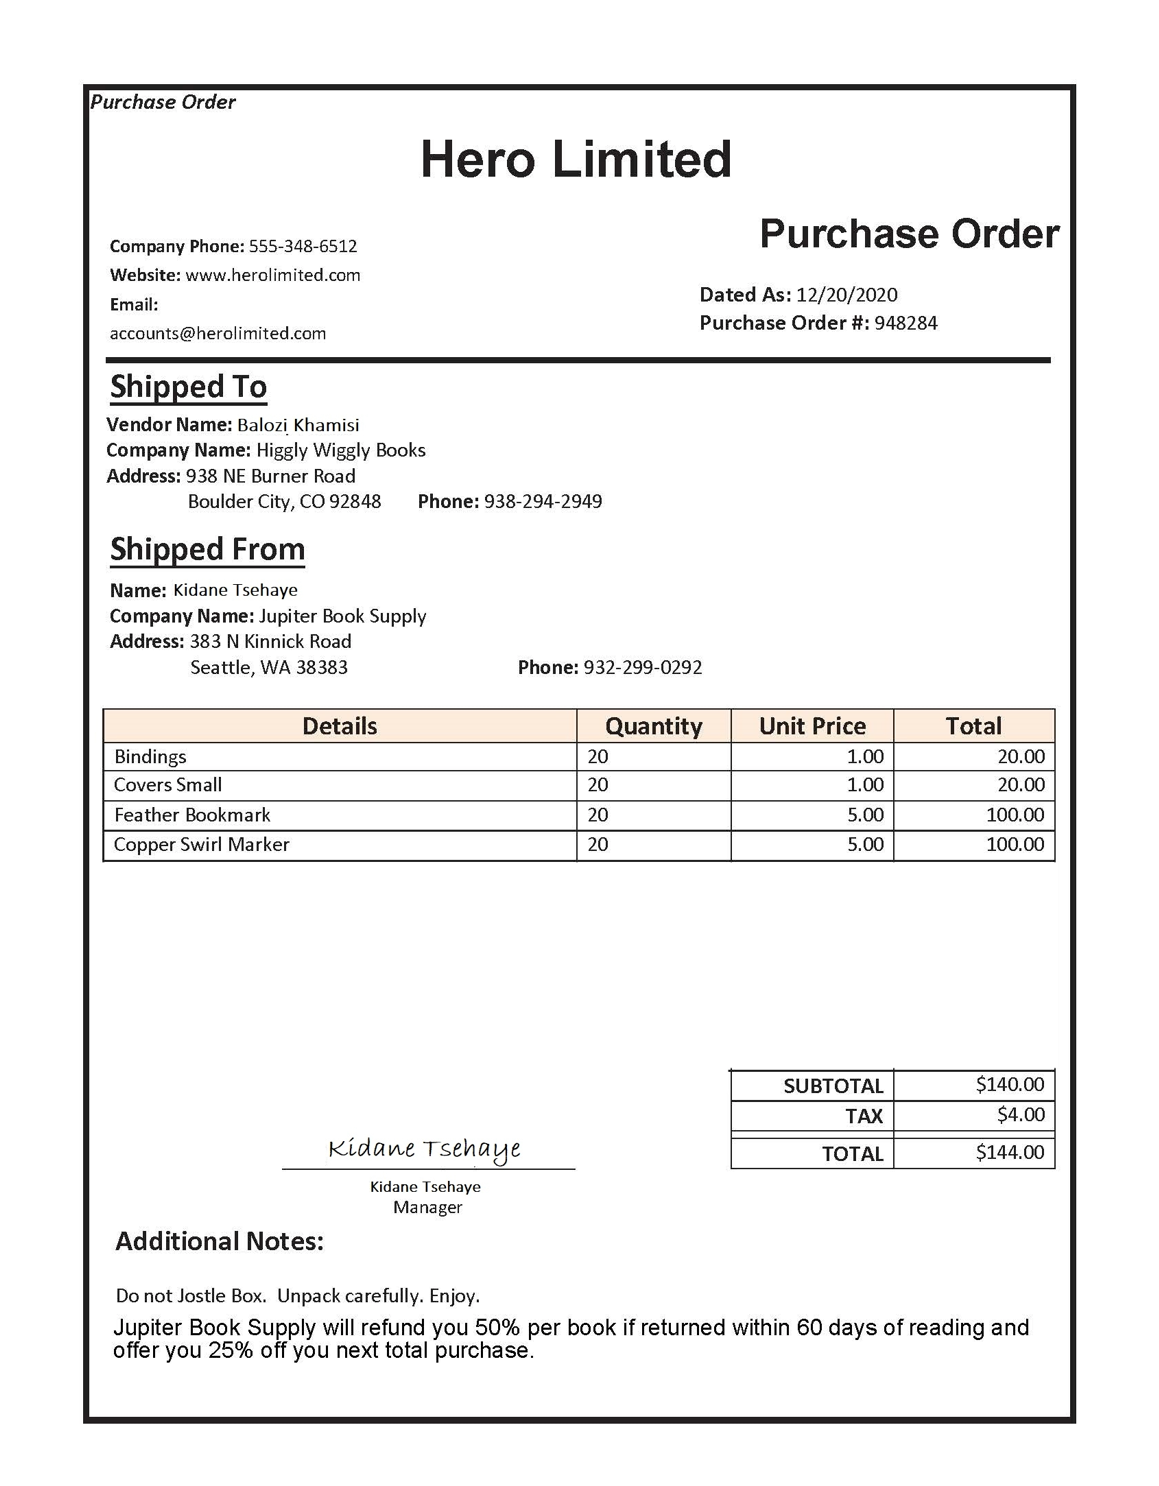 An image of an invoice used in this project.